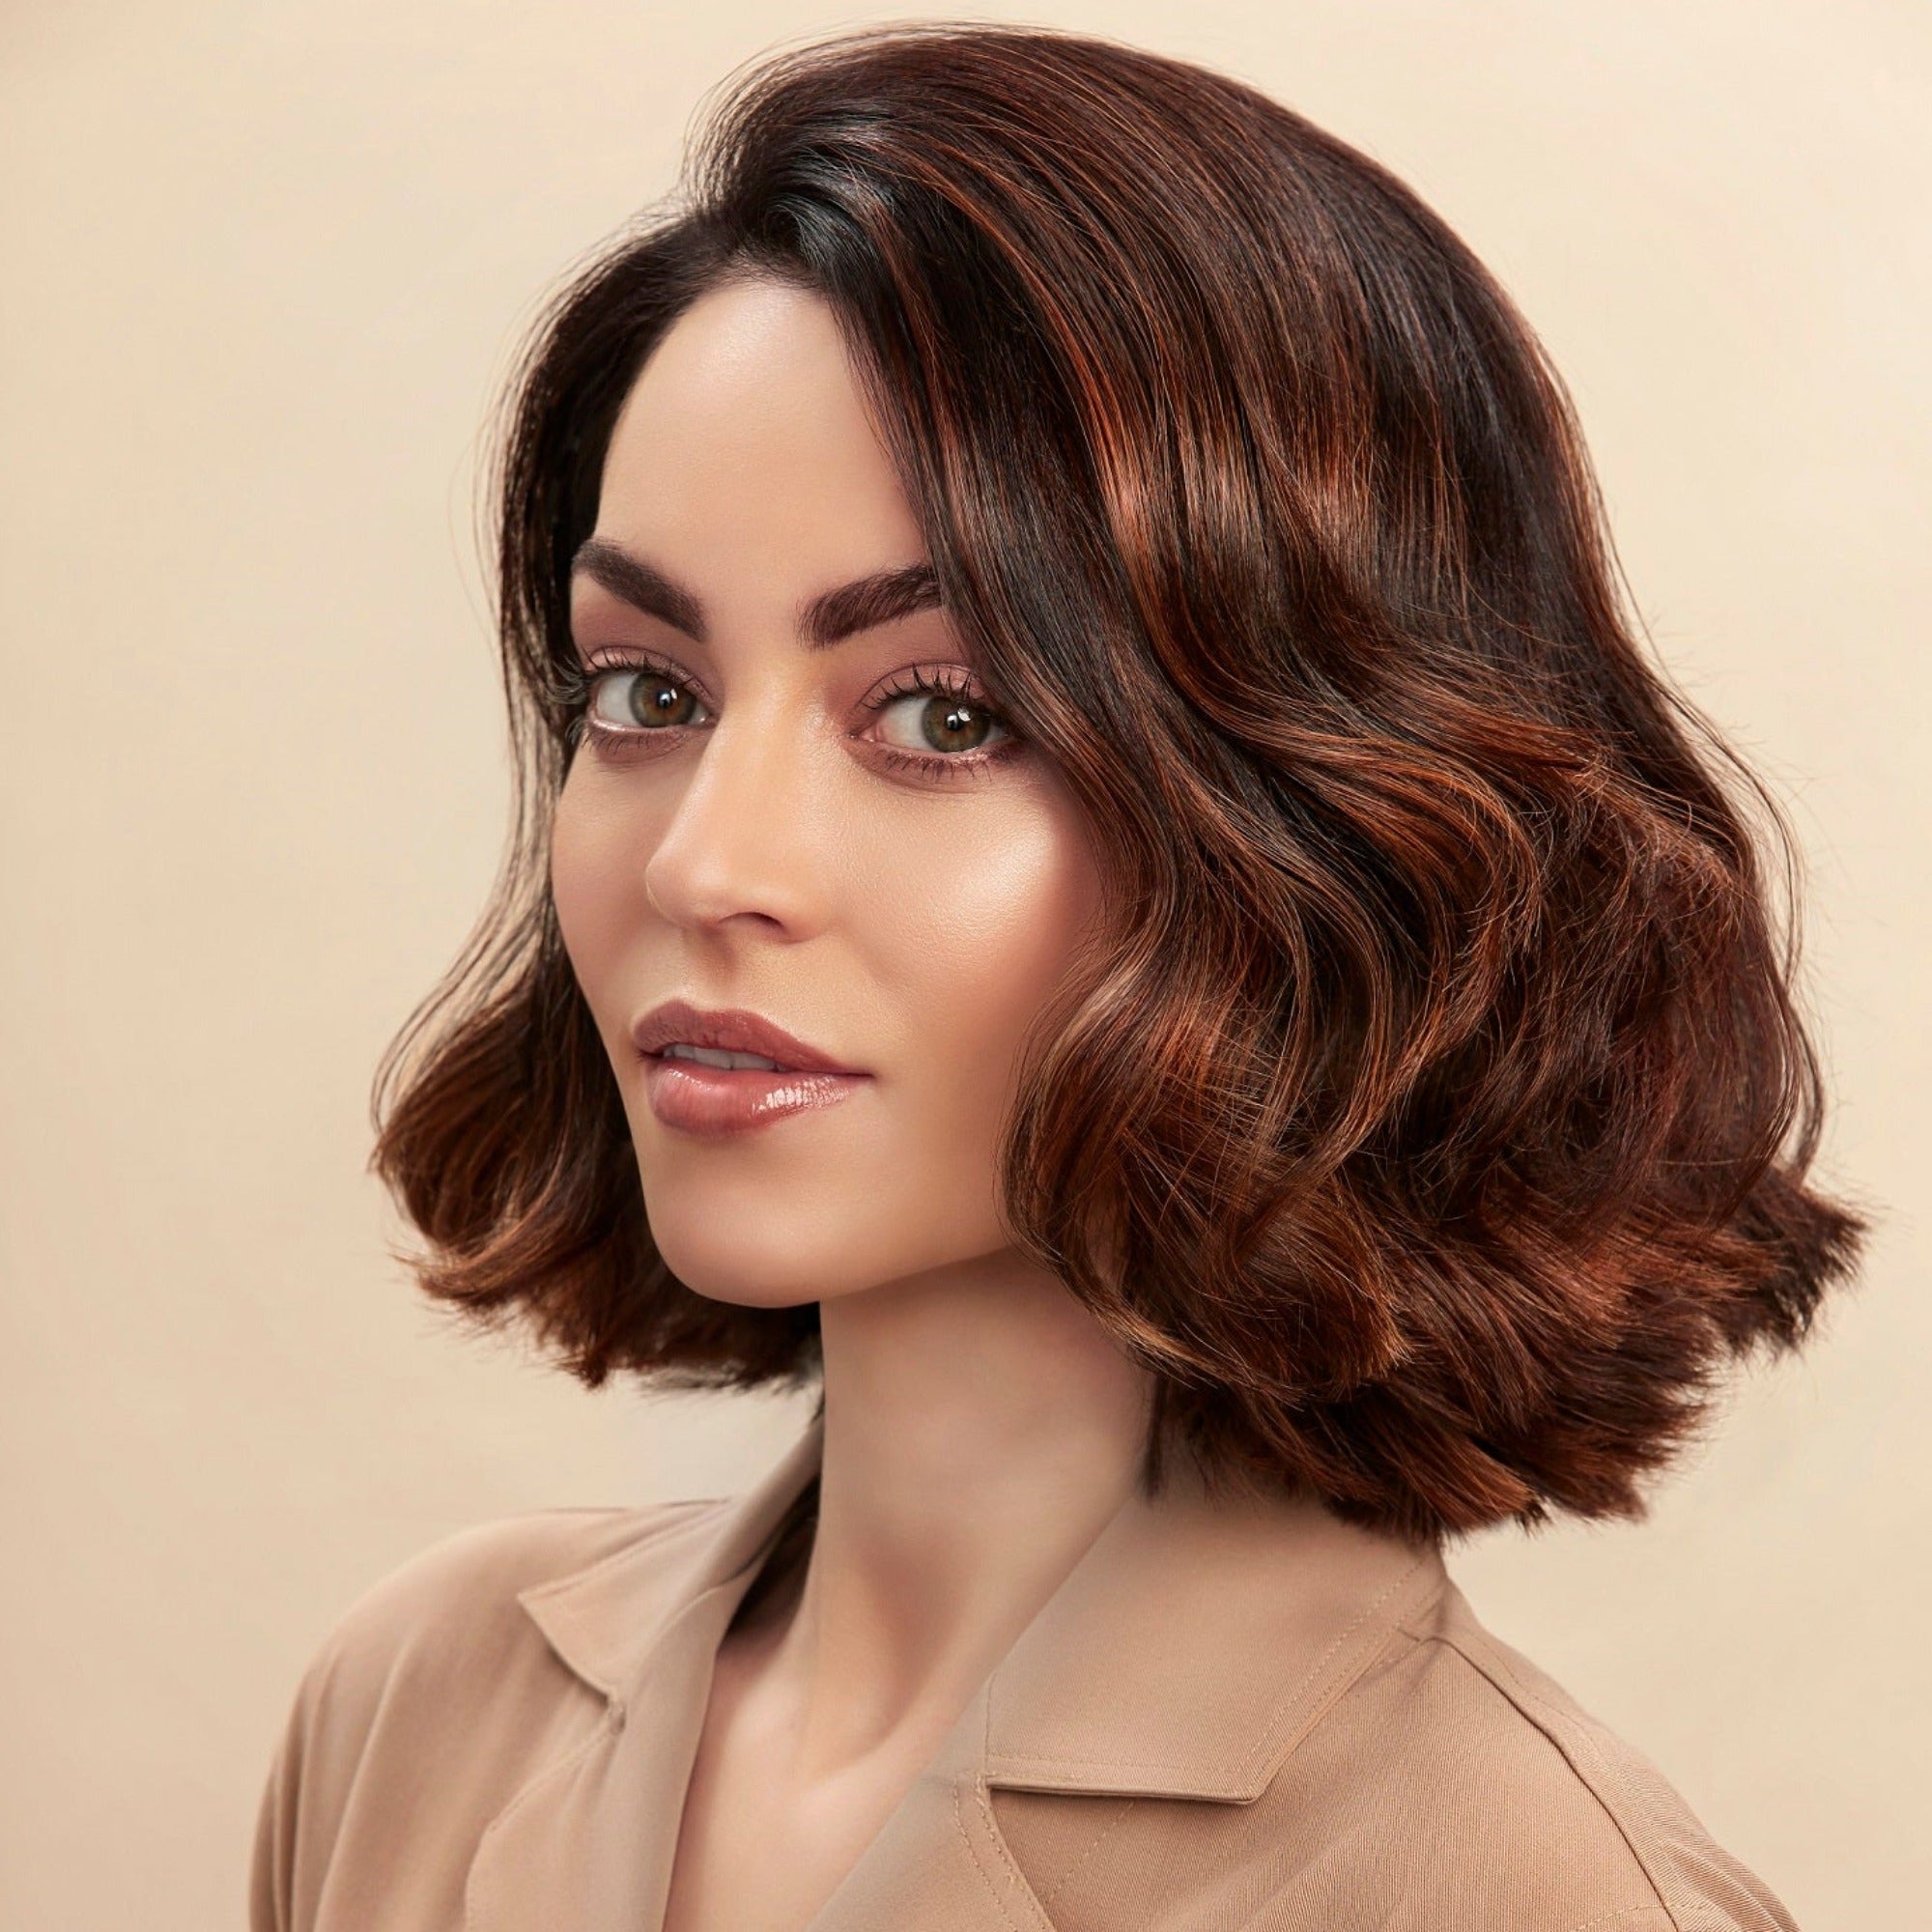 Female model with a wavy bob and brunette hair. She has super shiny hair and has used Moo & Yoo Miracle Shampoo, Conditioner and Volumising Spray Mist so she has  lots of volume. She is looking at the camera from a side angle and is wearing a neutral coloured shirt.